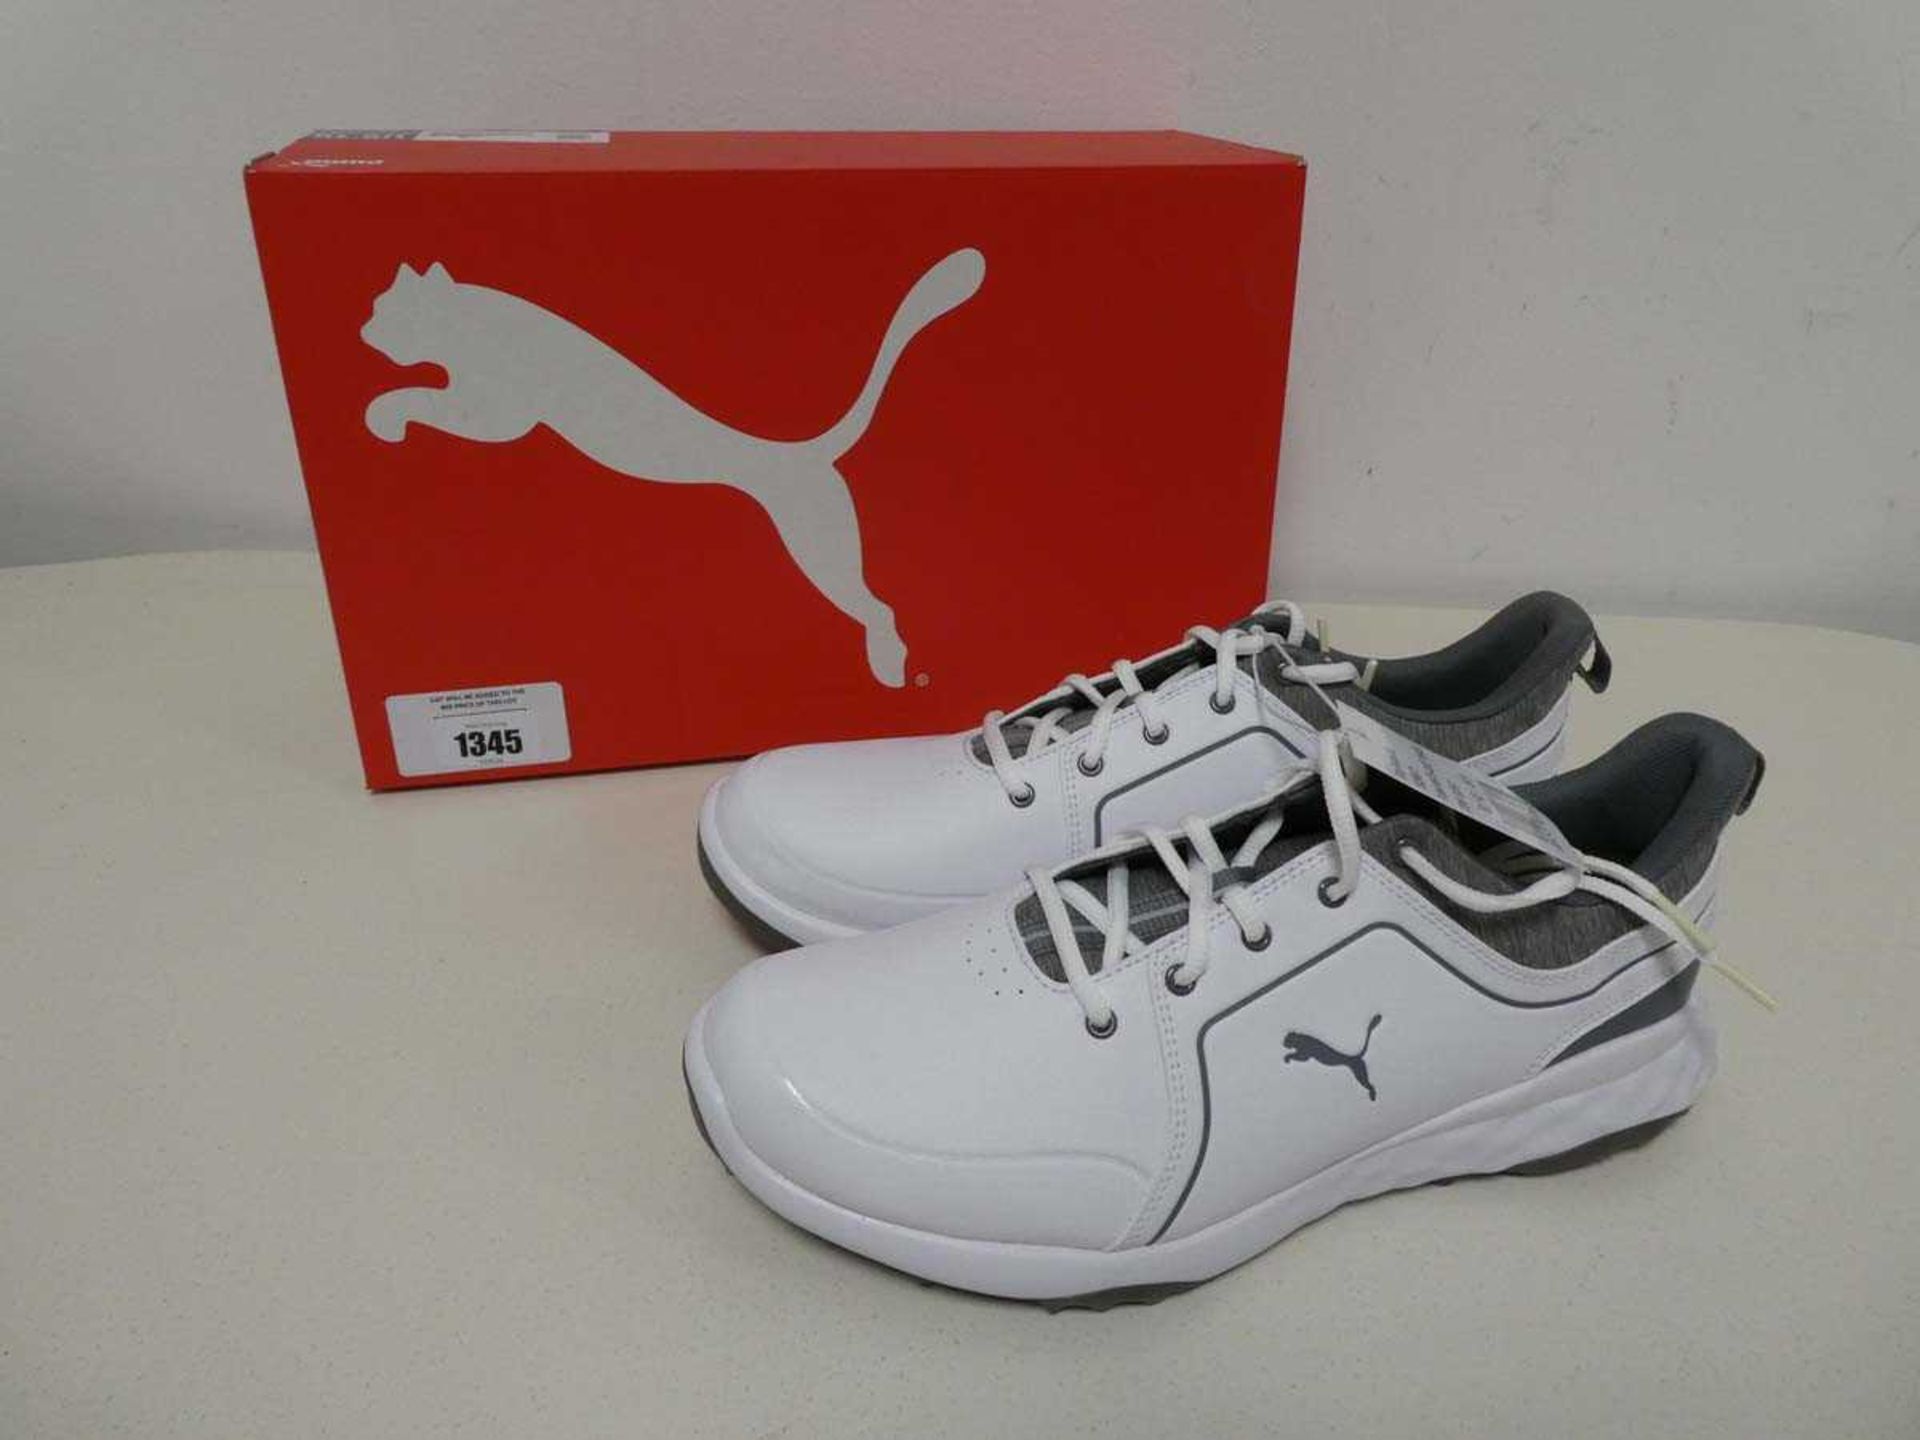 +VAT Boxed pair of men's Puma grip fusion trainers in white and grey size 9